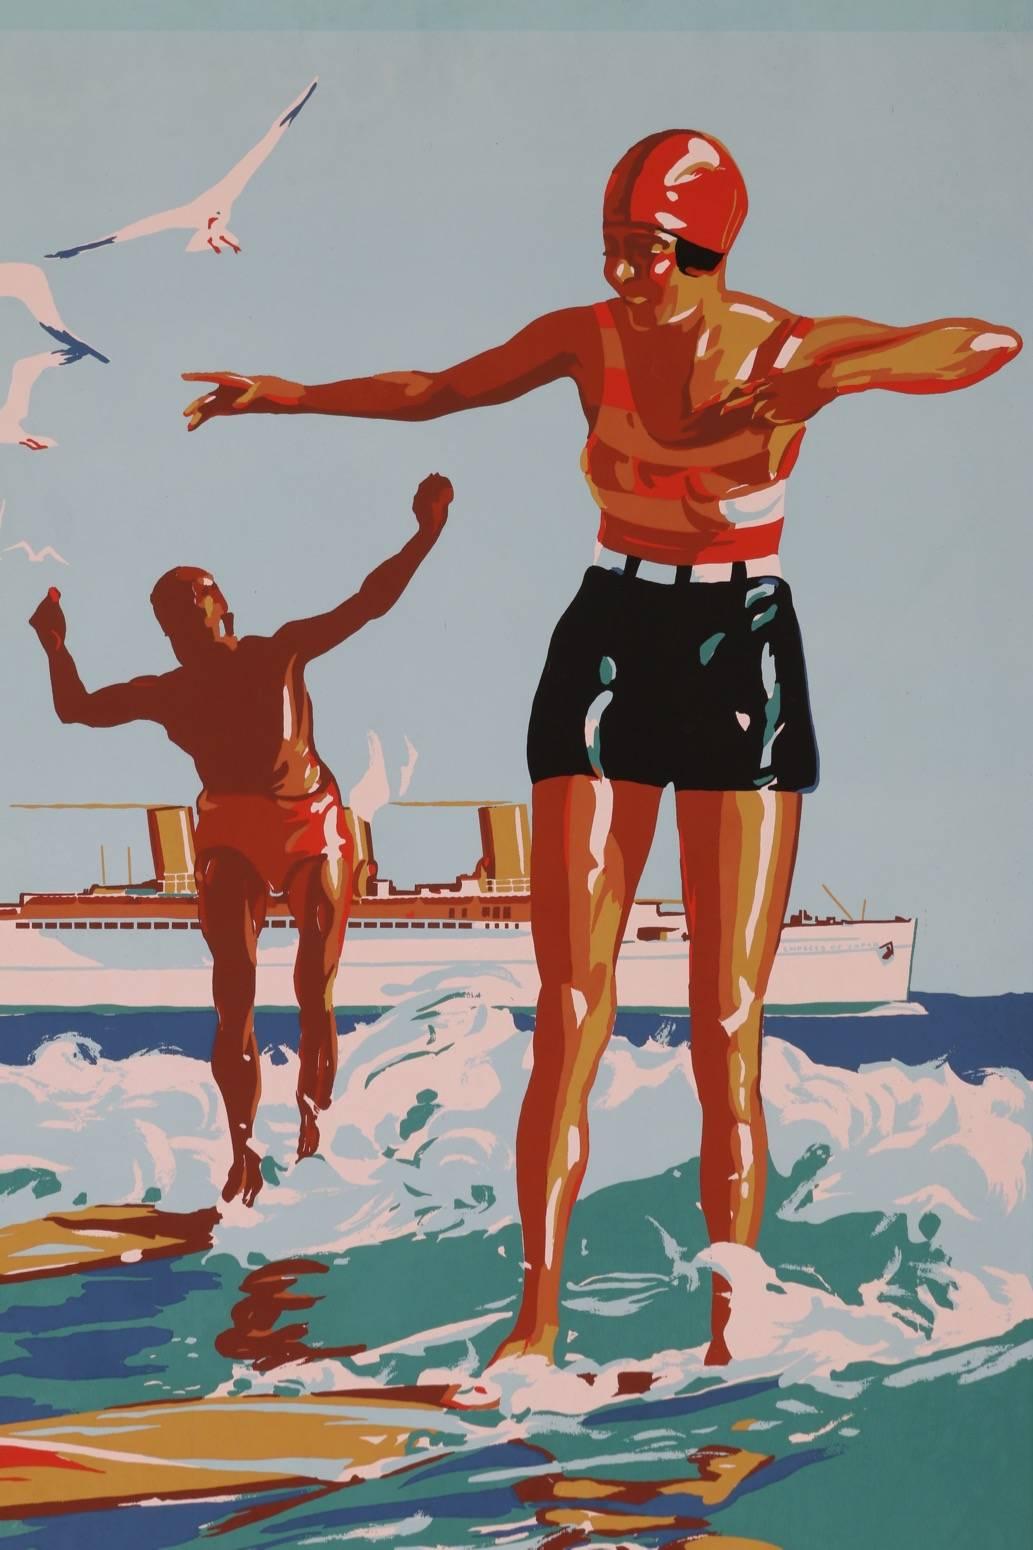 This is arguably the rarest of all the Hawaiian surf posters produced to promote tourism to the Hawaiian Islands. It is one of the earliest examples of Travel Posters featuring surfing imagery. On the ocean-liner we can see the name 'Empress of